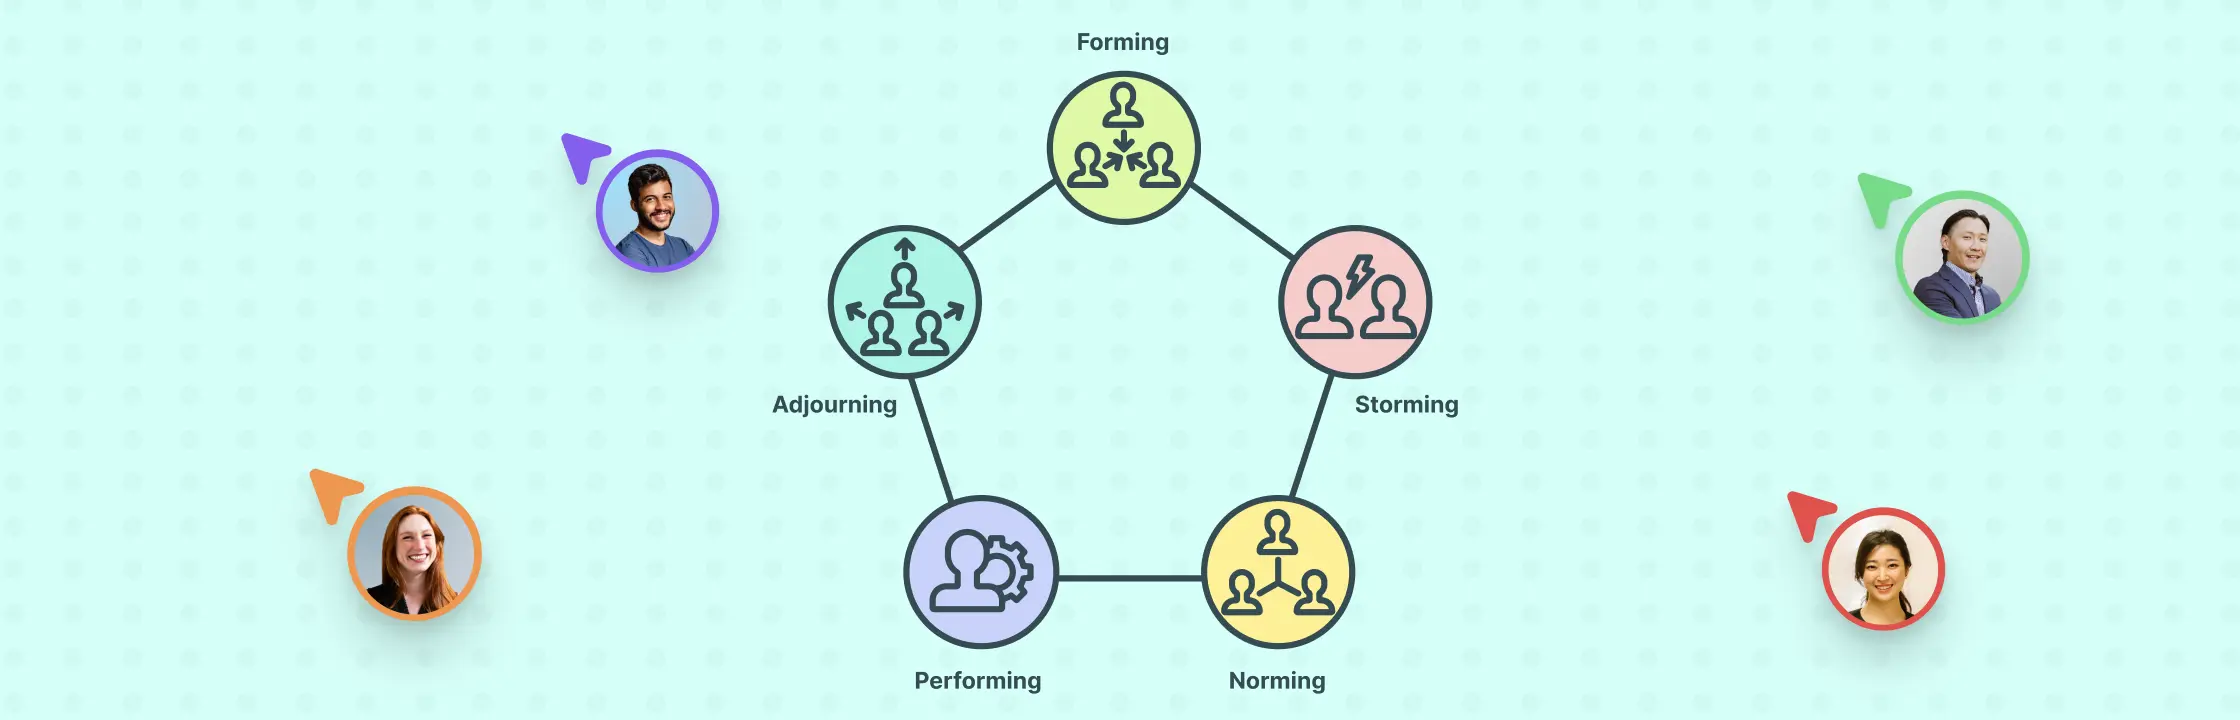 Forming, Storming, Norming, Performing: Stages of Team Development